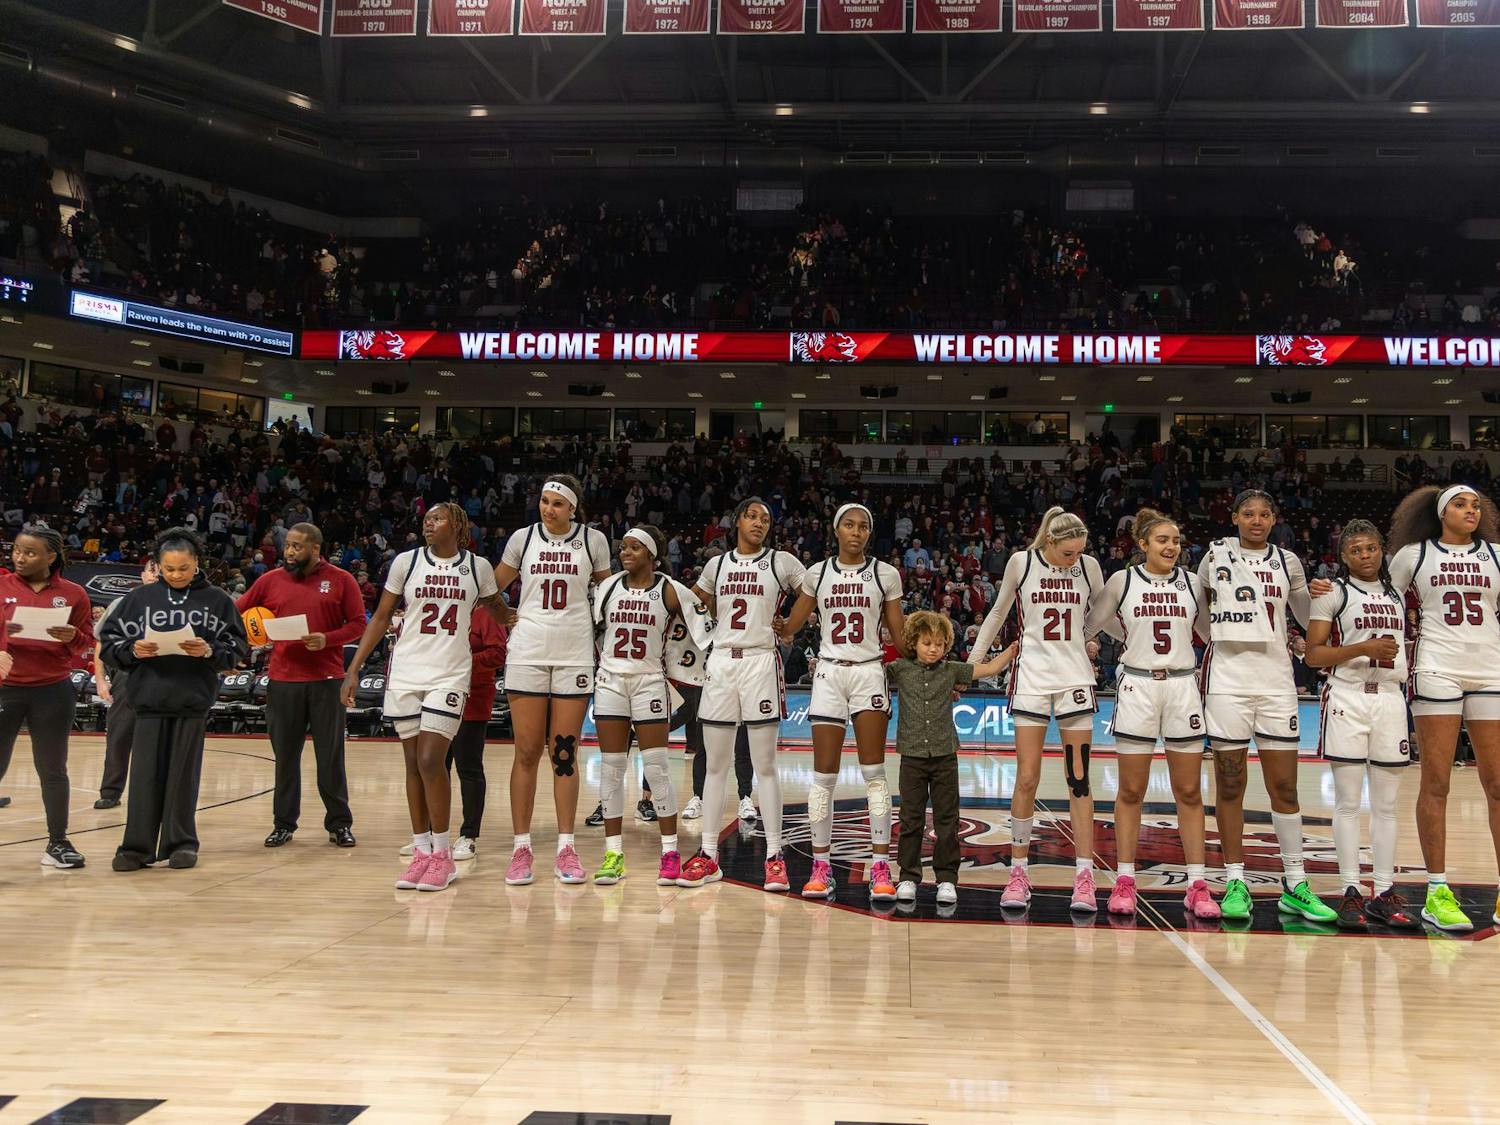 The South Carolina women's basketball team gathers on the court after its win over Mississippi State at Colonial Life Arena on Jan. 7, 2024. With the victory, the Gamecocks remain undefeated in the 2023-24 season.